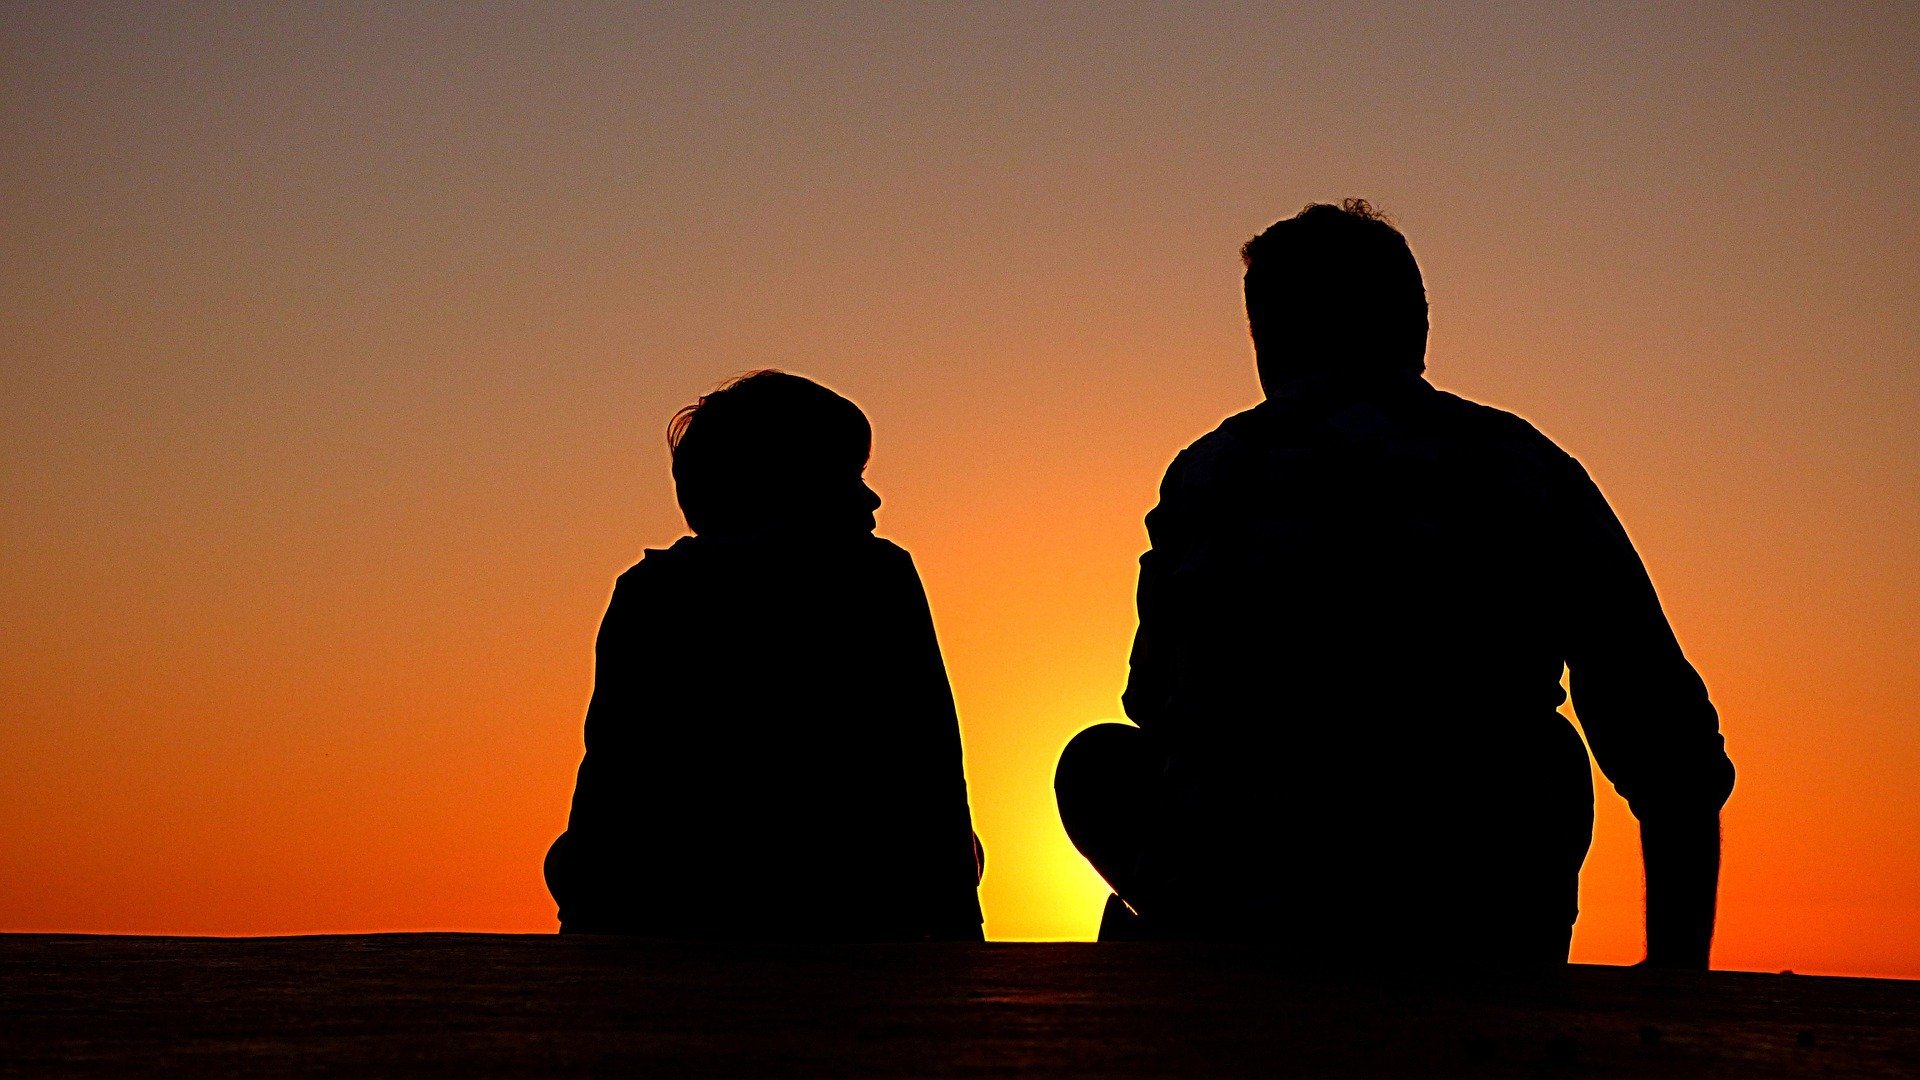 The silhouette of a father and son. | Source: Pixabay. 